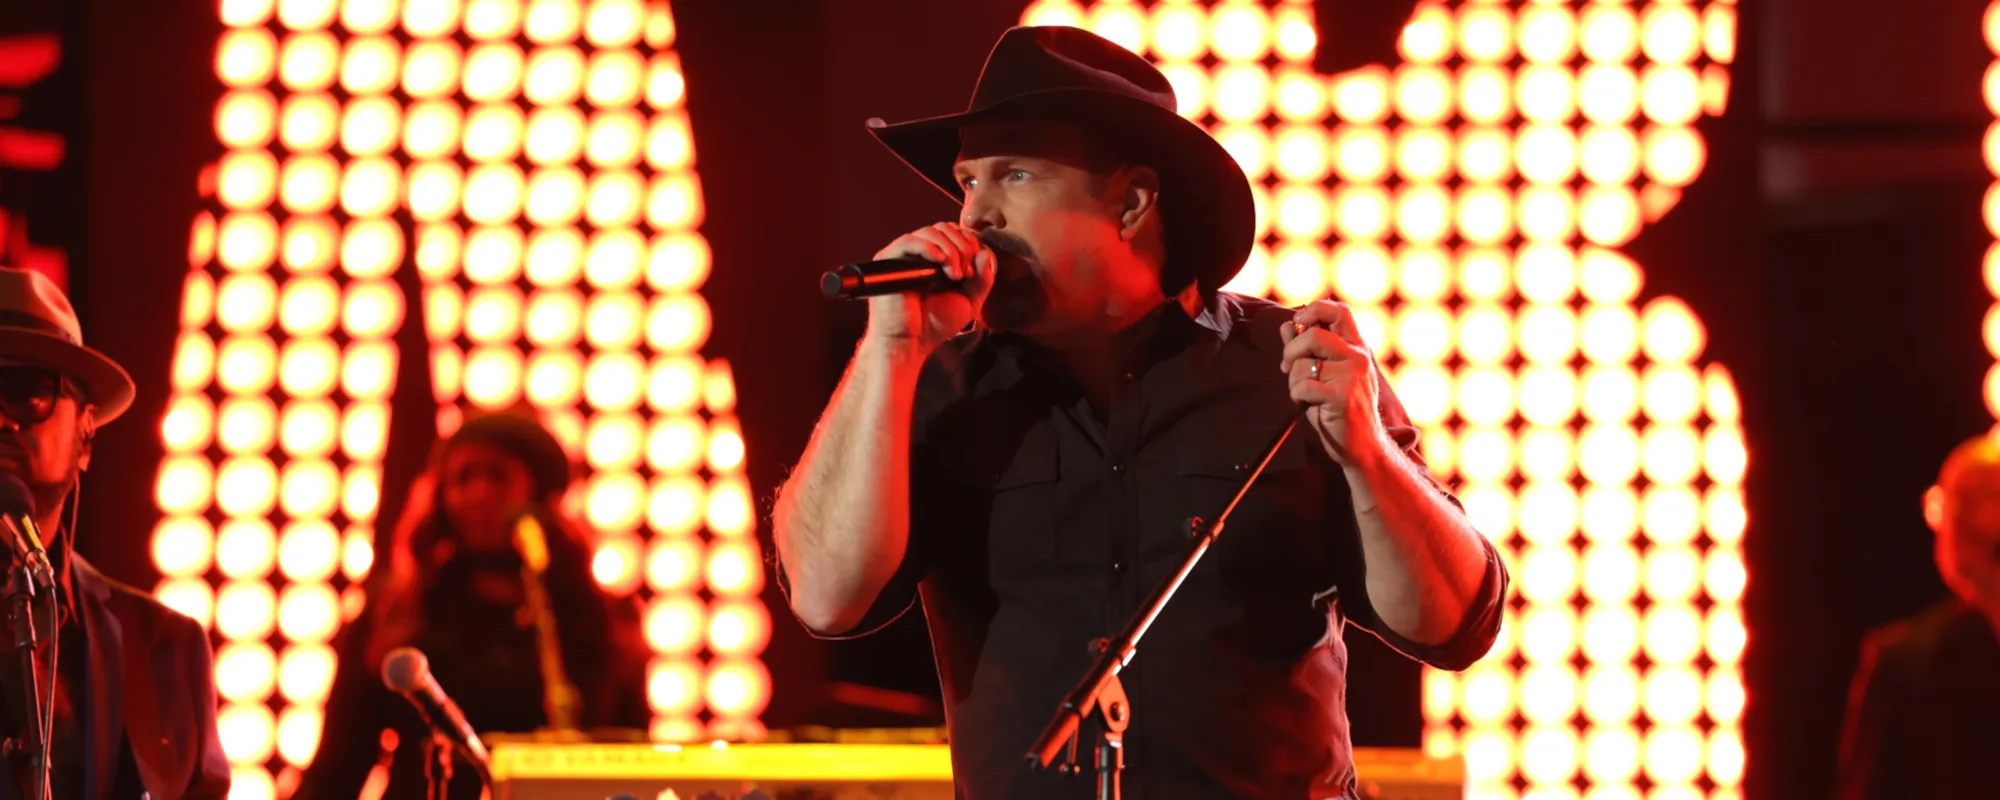 Garth Brooks Launches New Network of Radio Stations